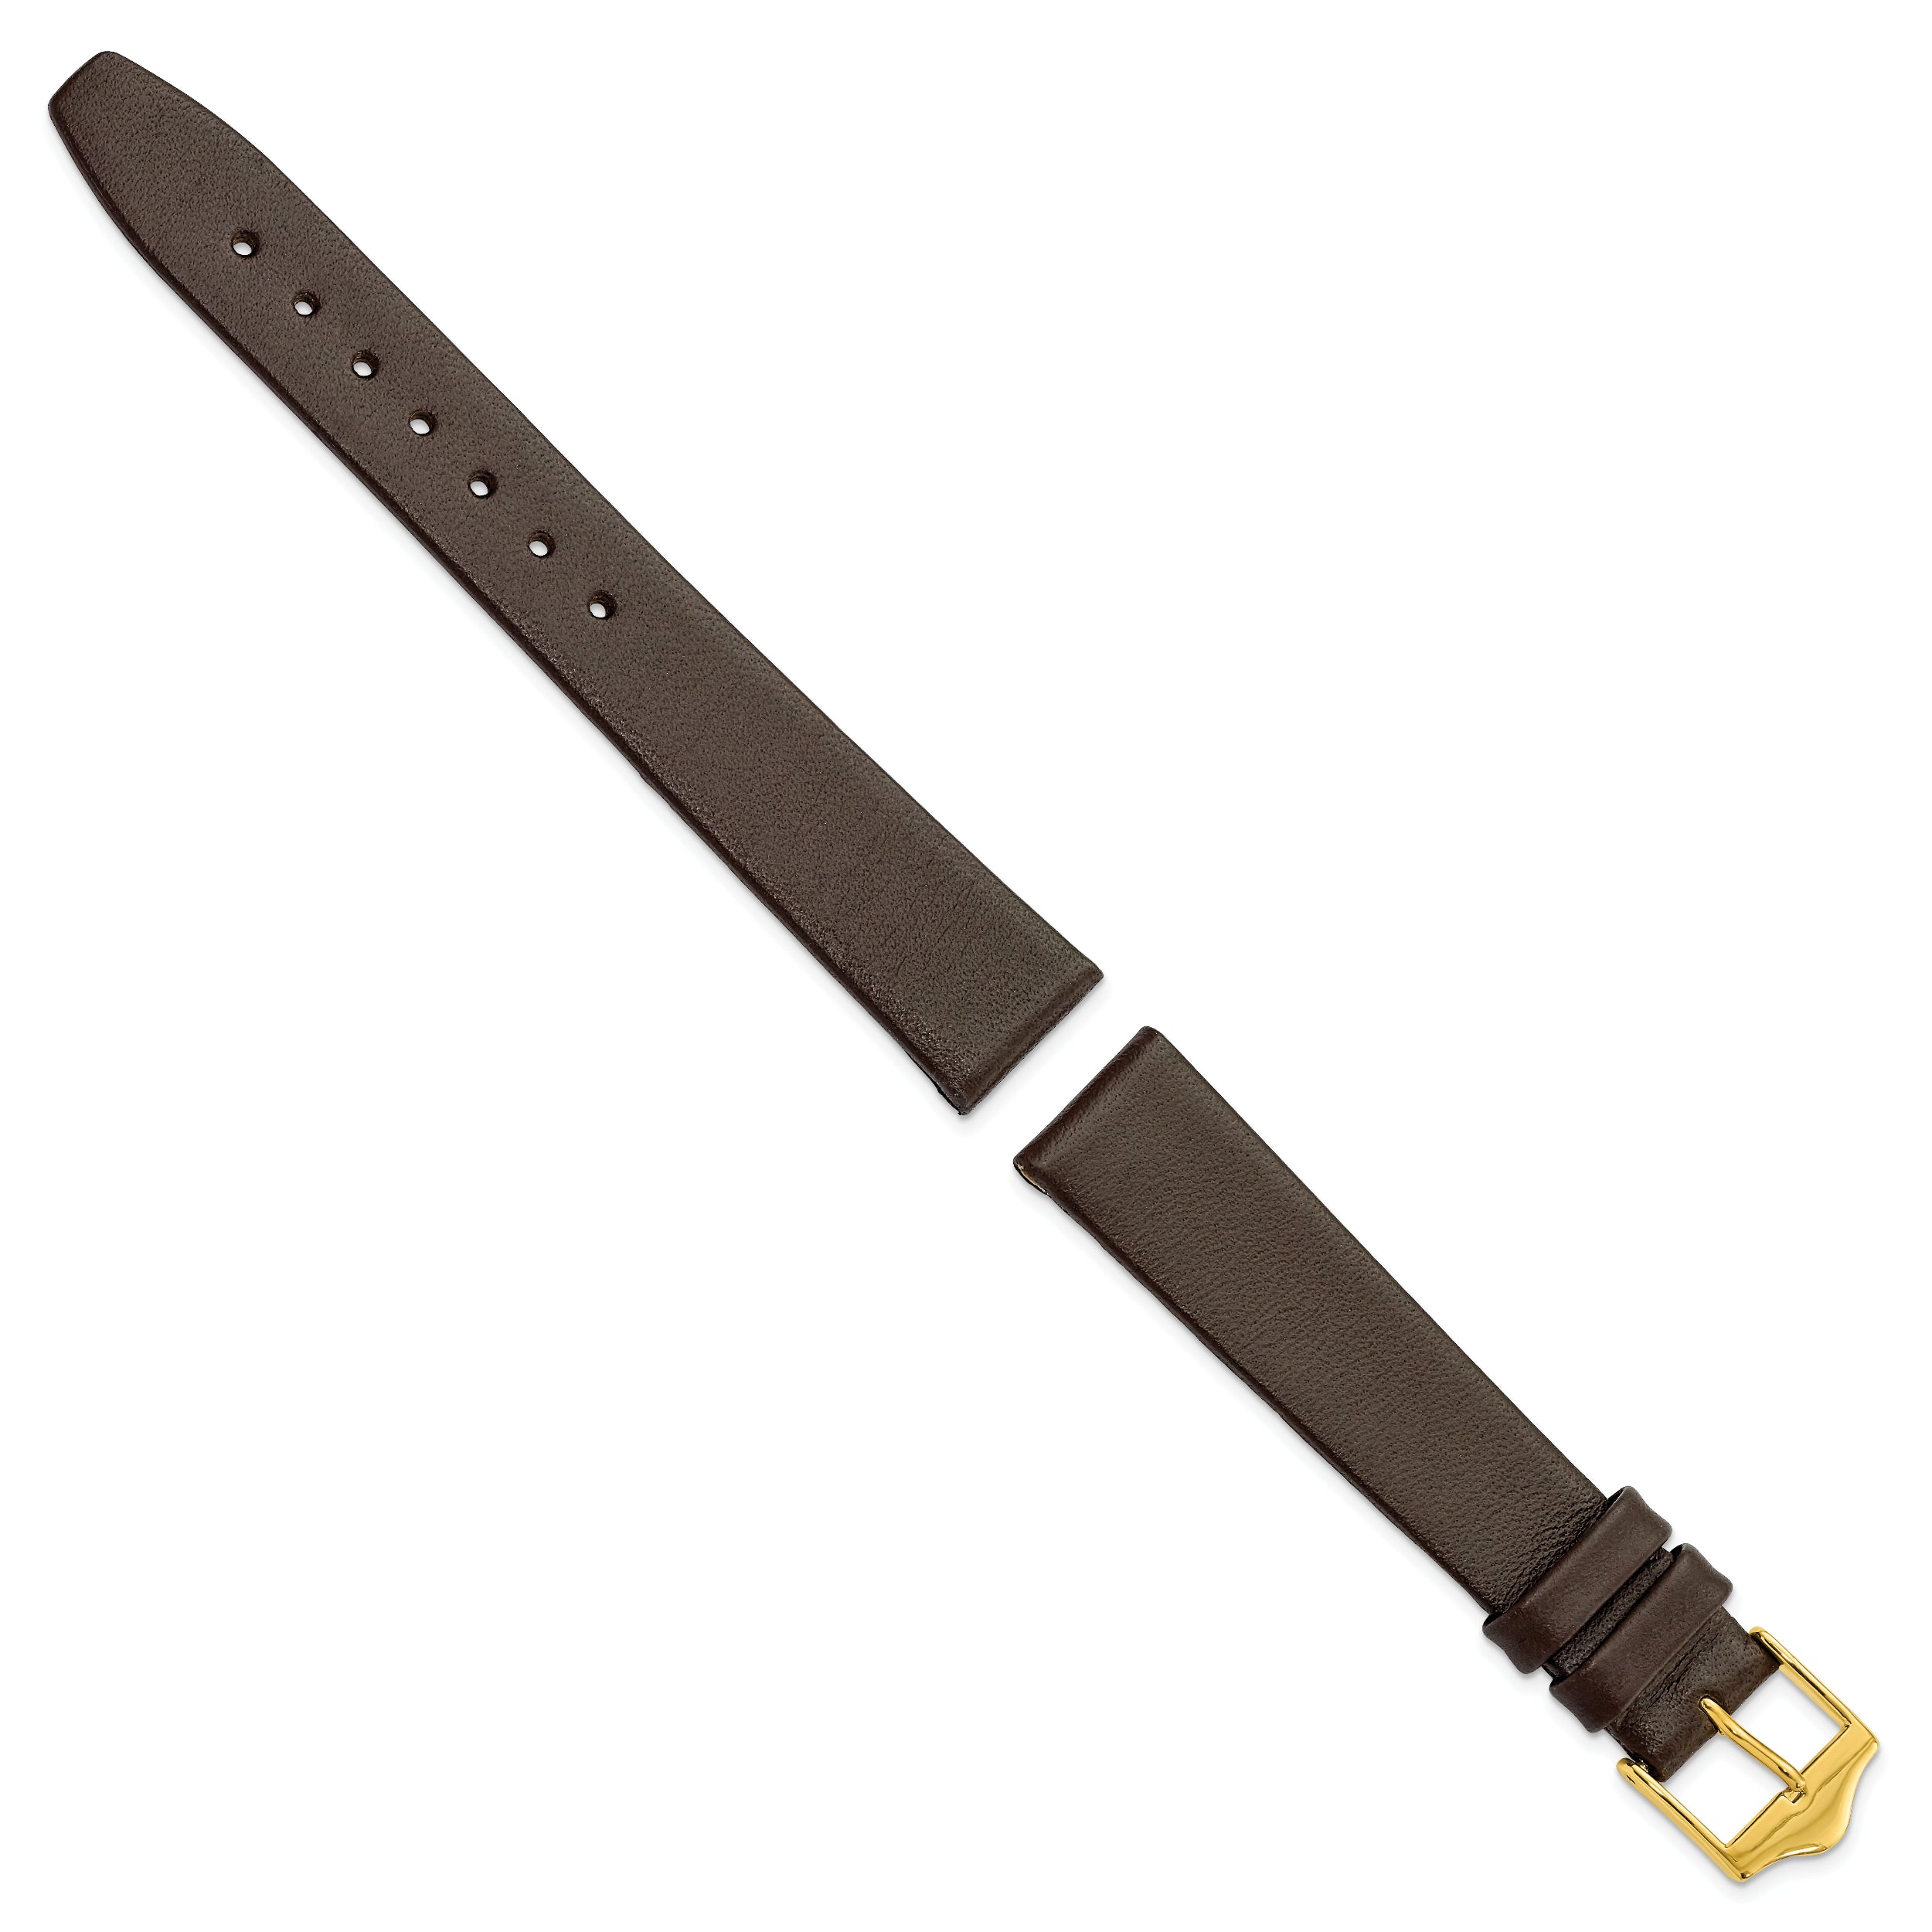 12mm Brown Smooth Flat Leather with Gold-tone Buckle 6.75 inch Watch Band